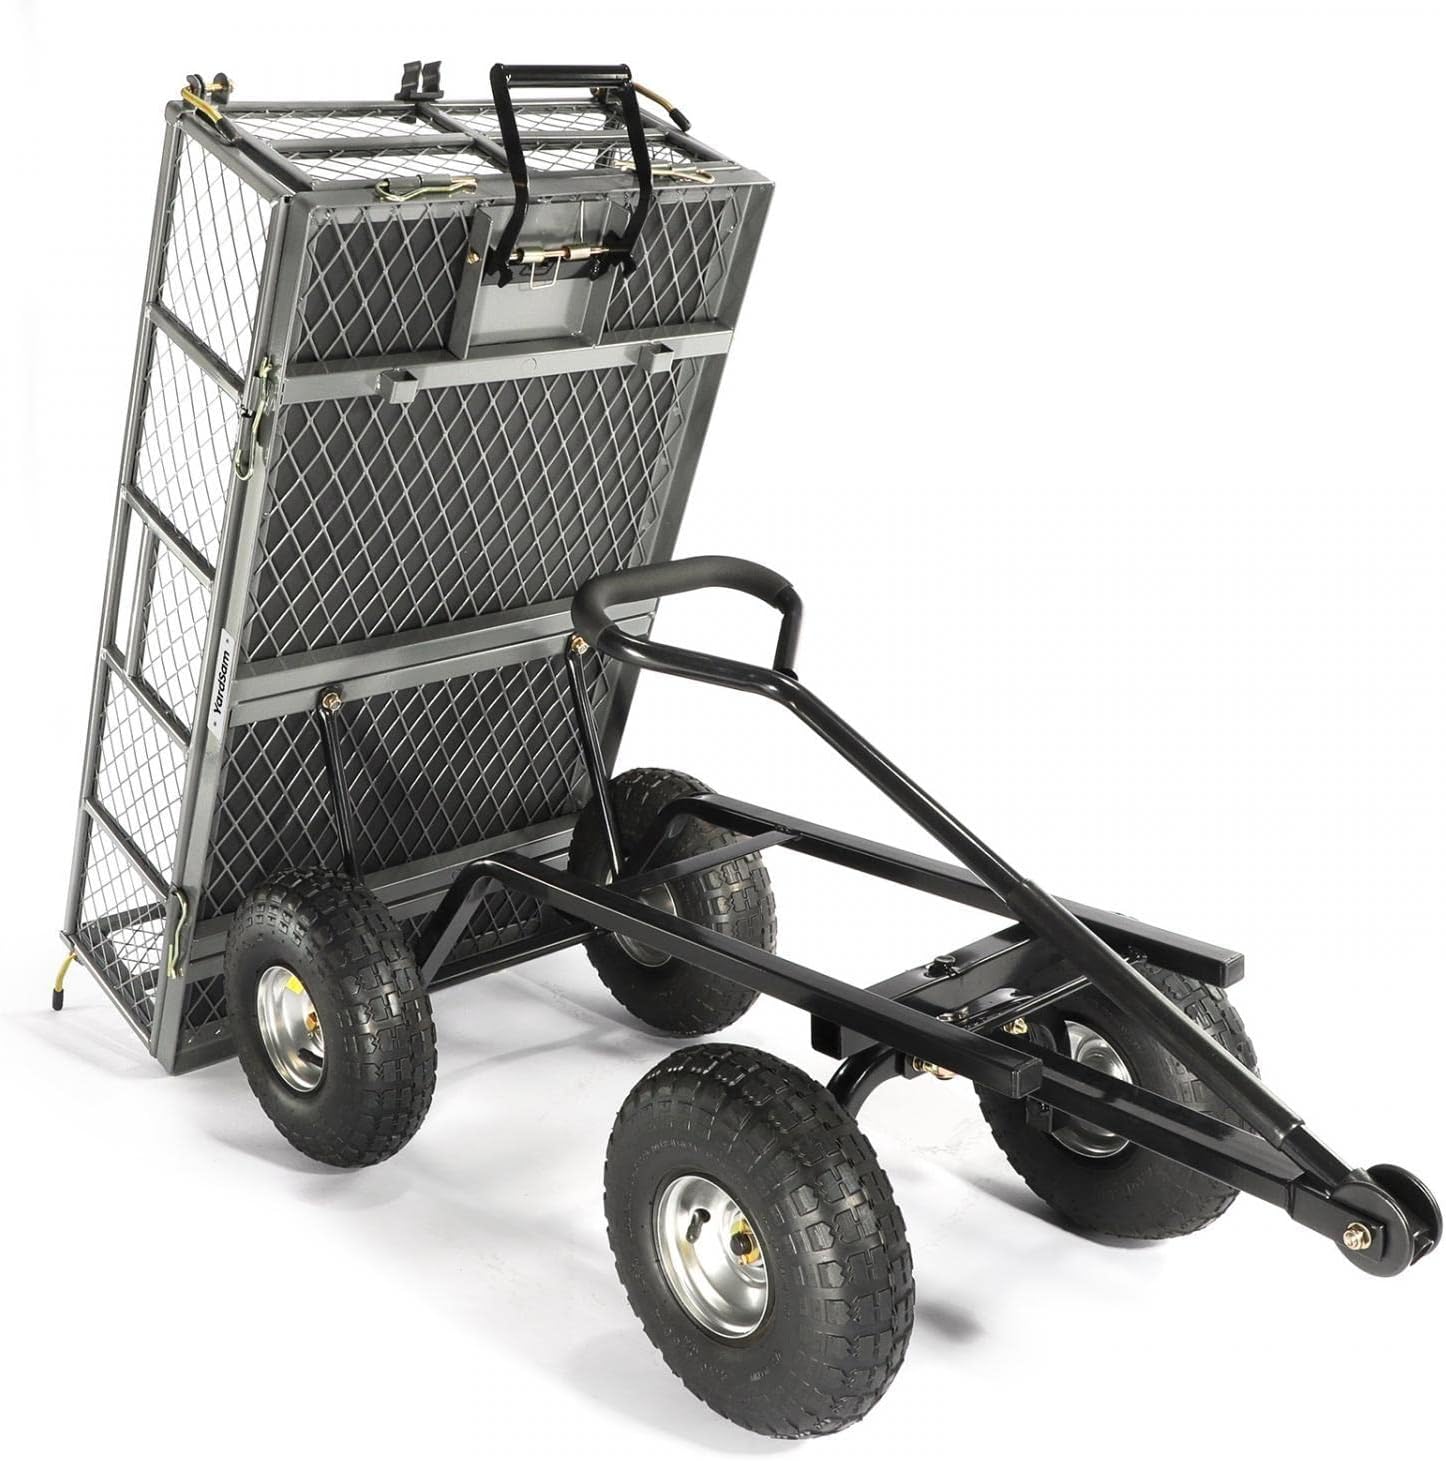 Yardsam Dump Garden Carts 800 lb Capacity, Heavy Duty Steel Garden Carts and Wagons with Removable Sides, Pullable Handles, 10in All-Terrain Wheels, Utility Liner, for Garden Lawn Yard Farm, Grey